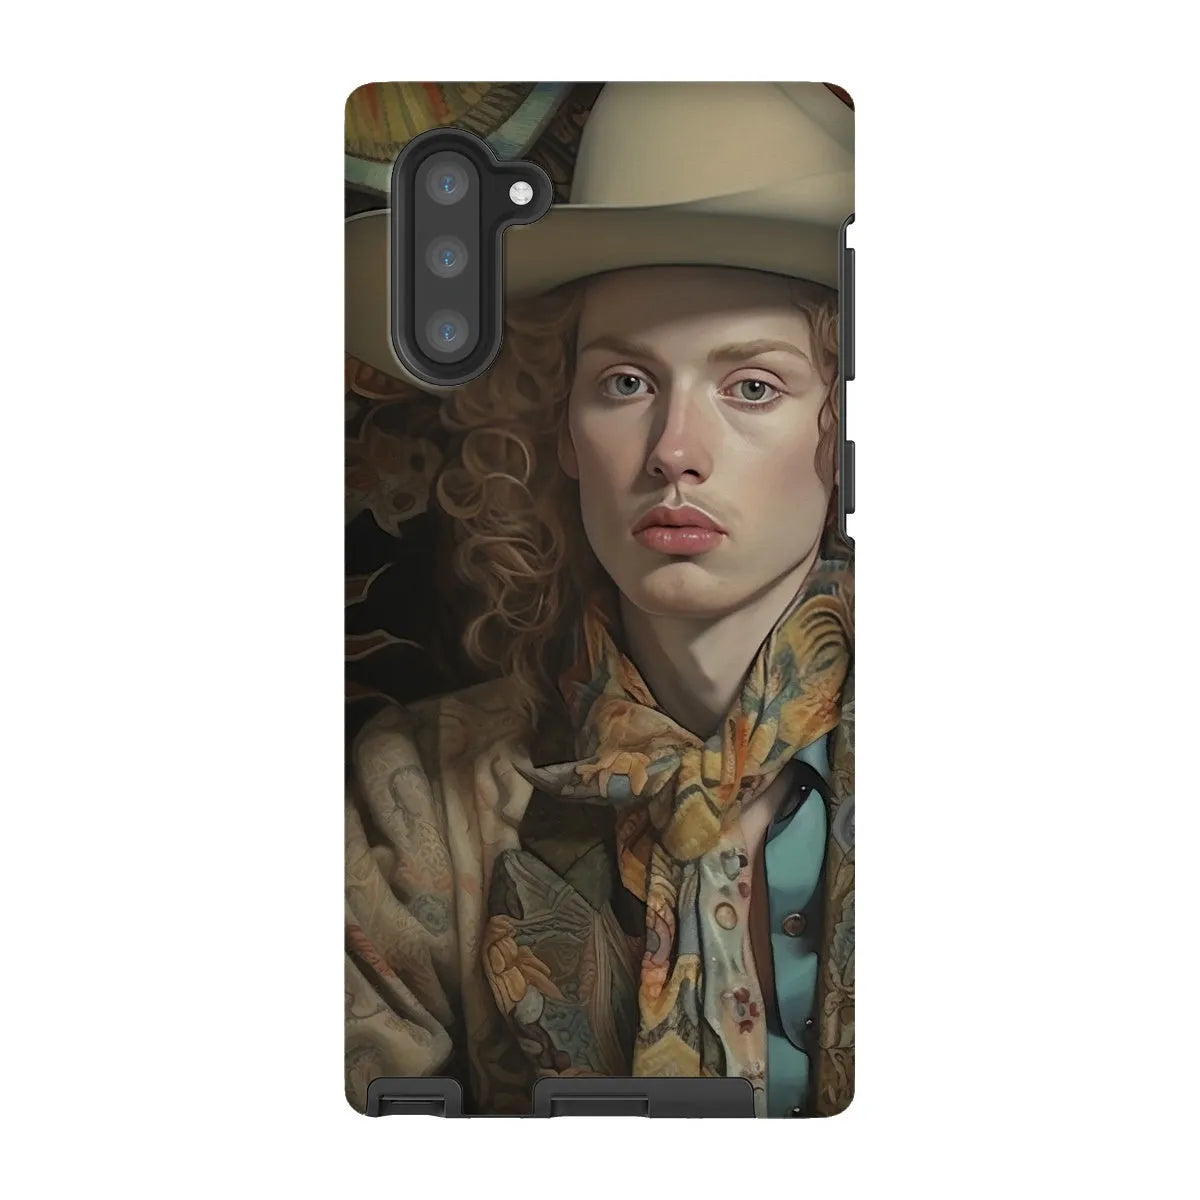 Ollie The Transgender Cowboy - F2m Dandy Outlaw Phone Case - Samsung Galaxy Note 10 / Matte - Mobile Phone Cases